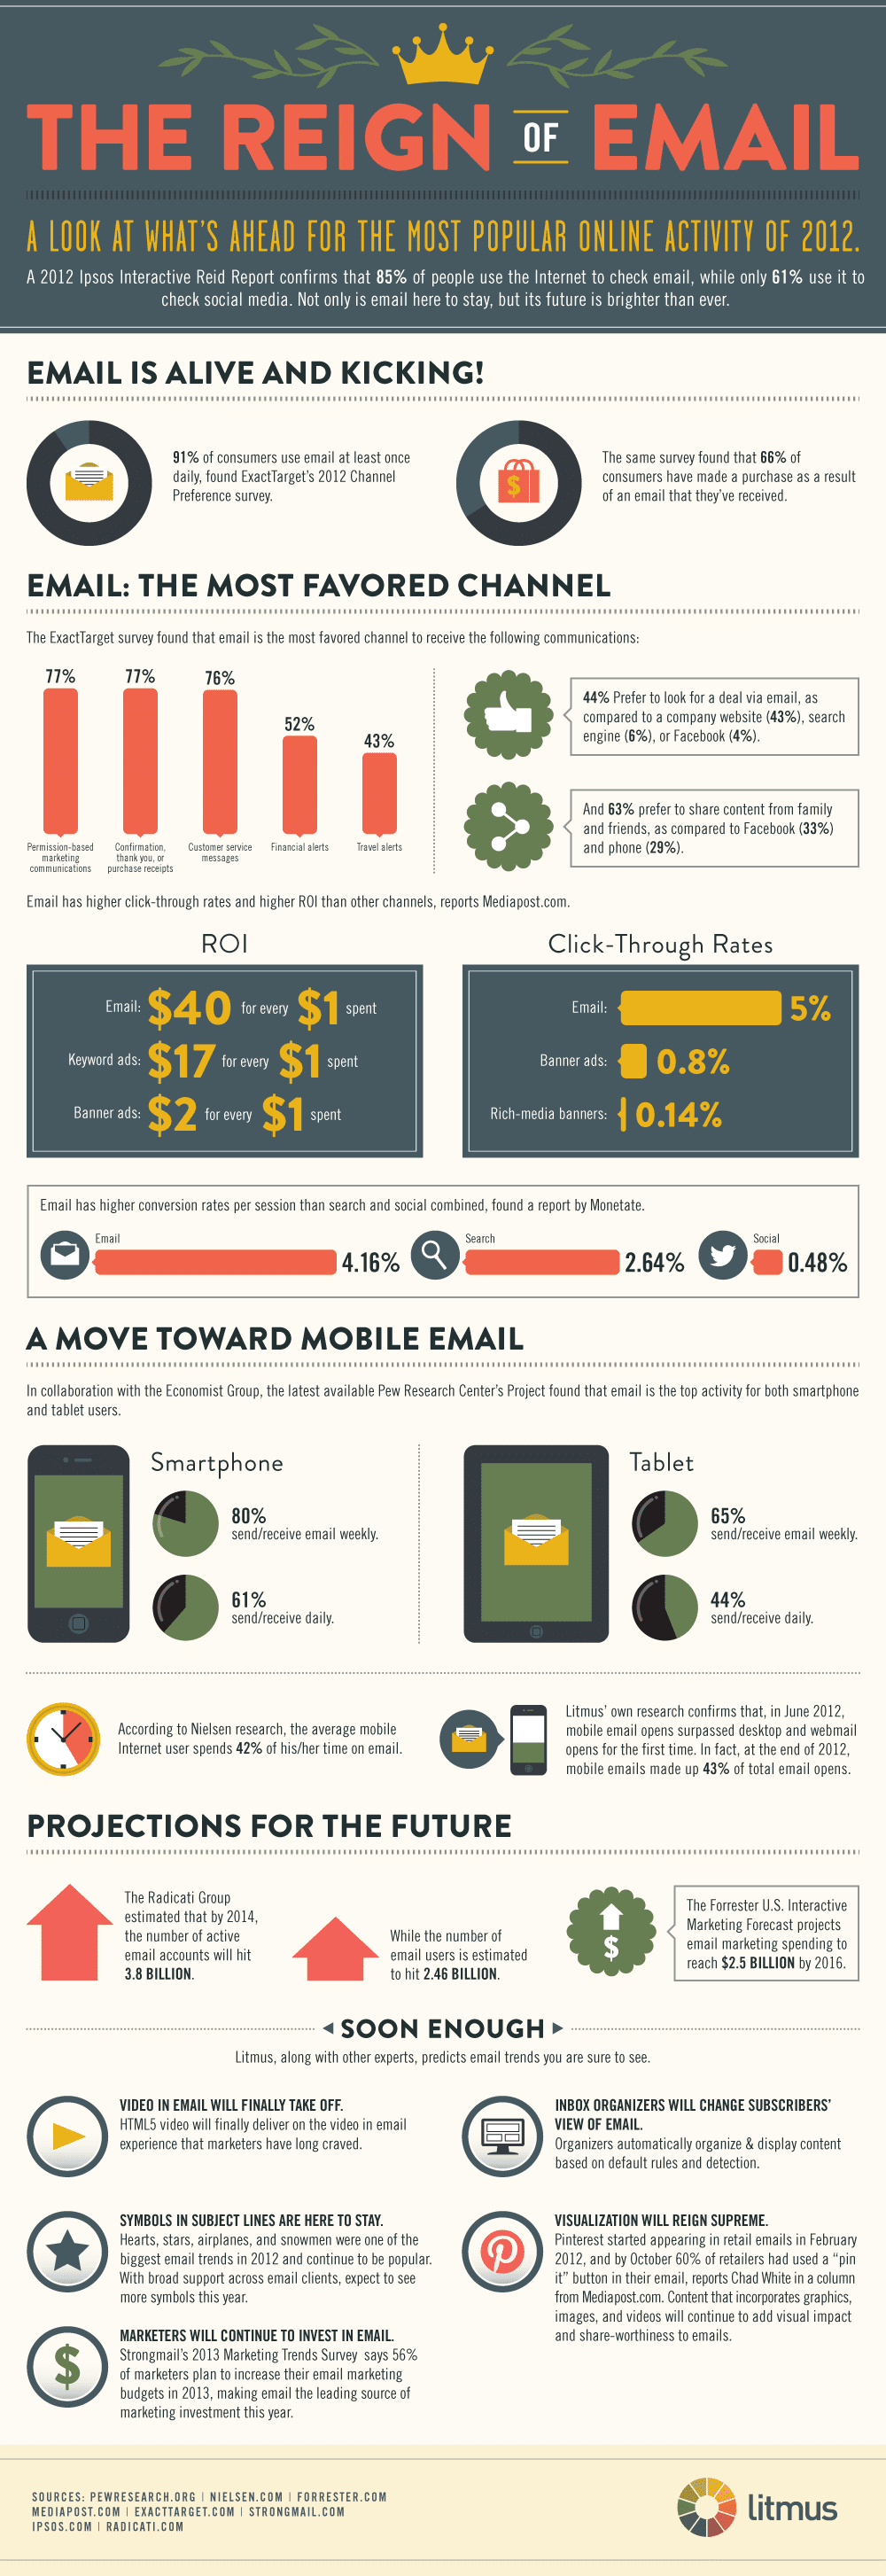 Why Email Still Reigns Online Interaction [Infographic]